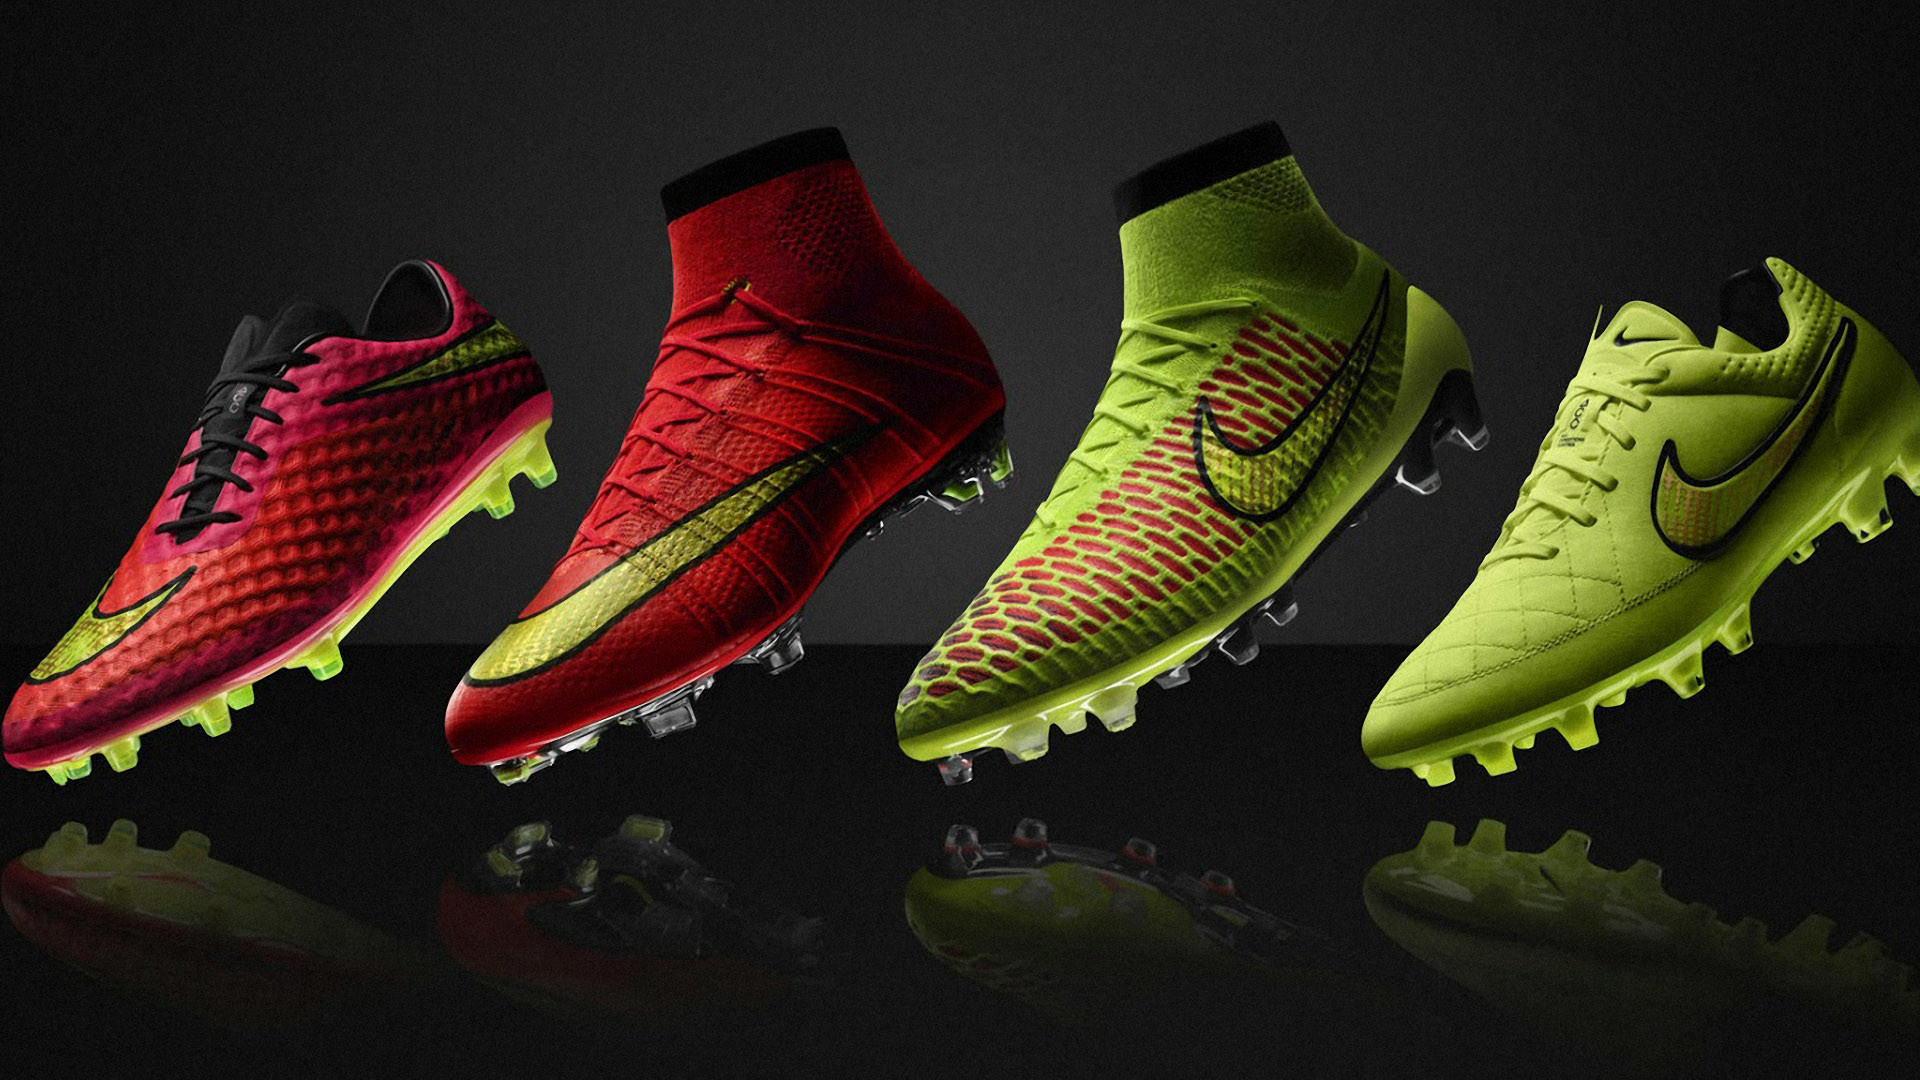 1920x1080 Nike Summer 2014 Football Boots Exclusive HD Wallpapers #7232